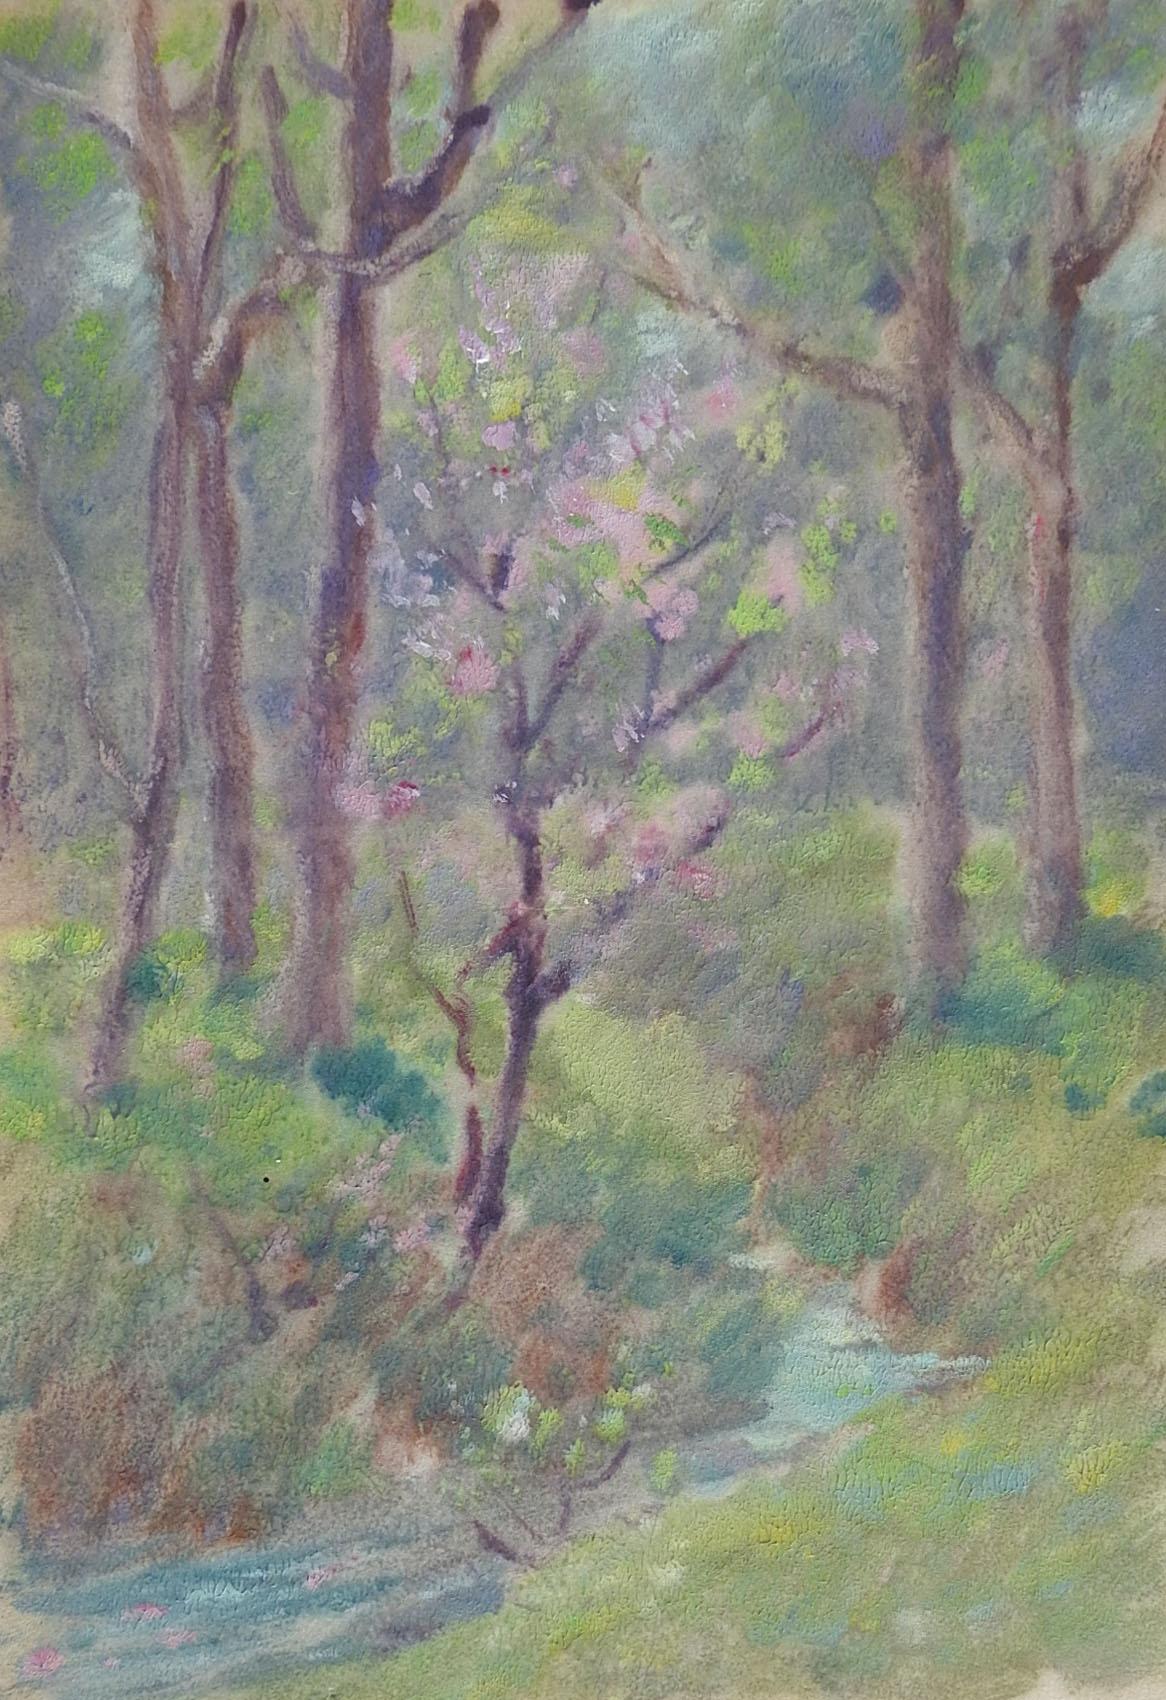 Vintage 1924 oil on paper painting by Dawson Dawson-Watson (1864–1939) early Texas artist. Signed and dated 1924 in pencil lower right margin. Scene is of a small stream among pink flowering trees, thin application on semi translucent tan paper.